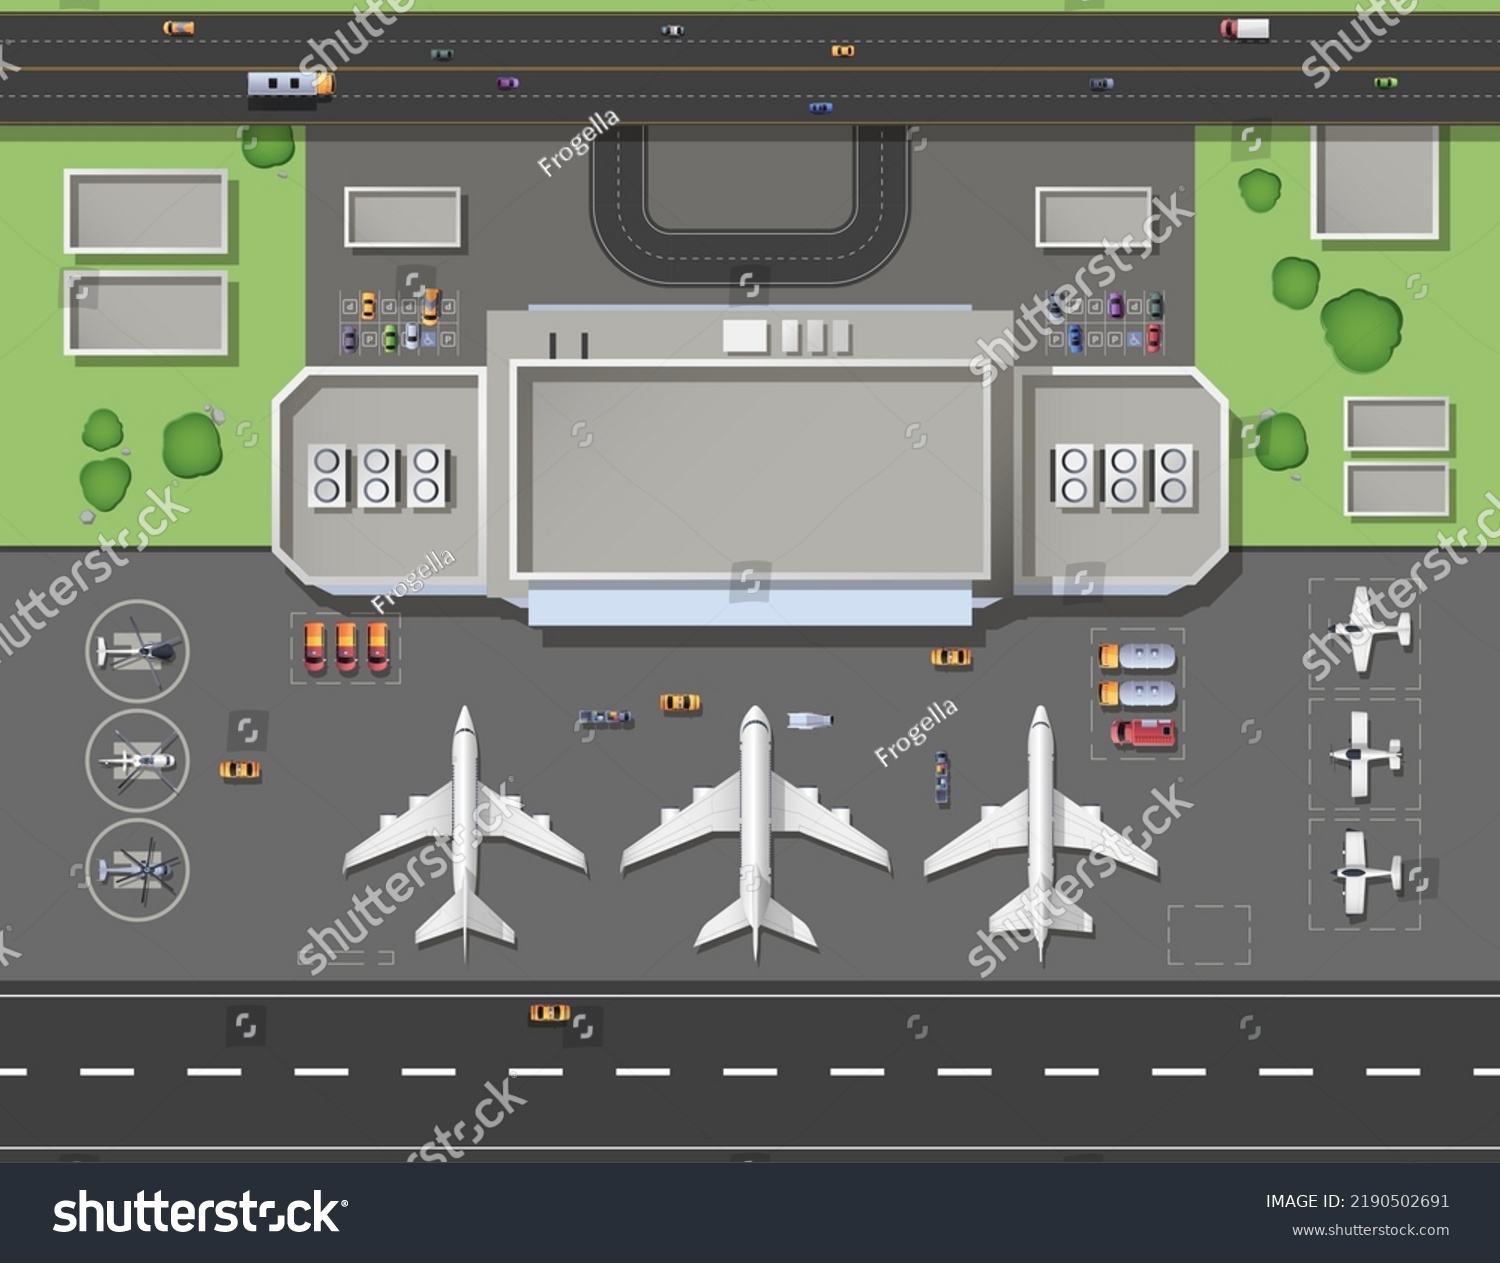 Airport terminal top view. Cartoon hangars, runway, cargo and passenger aircraft on parking area, service vehicles aerial top view. Vector city airport overhead illustration. Aviation transport #2190502691